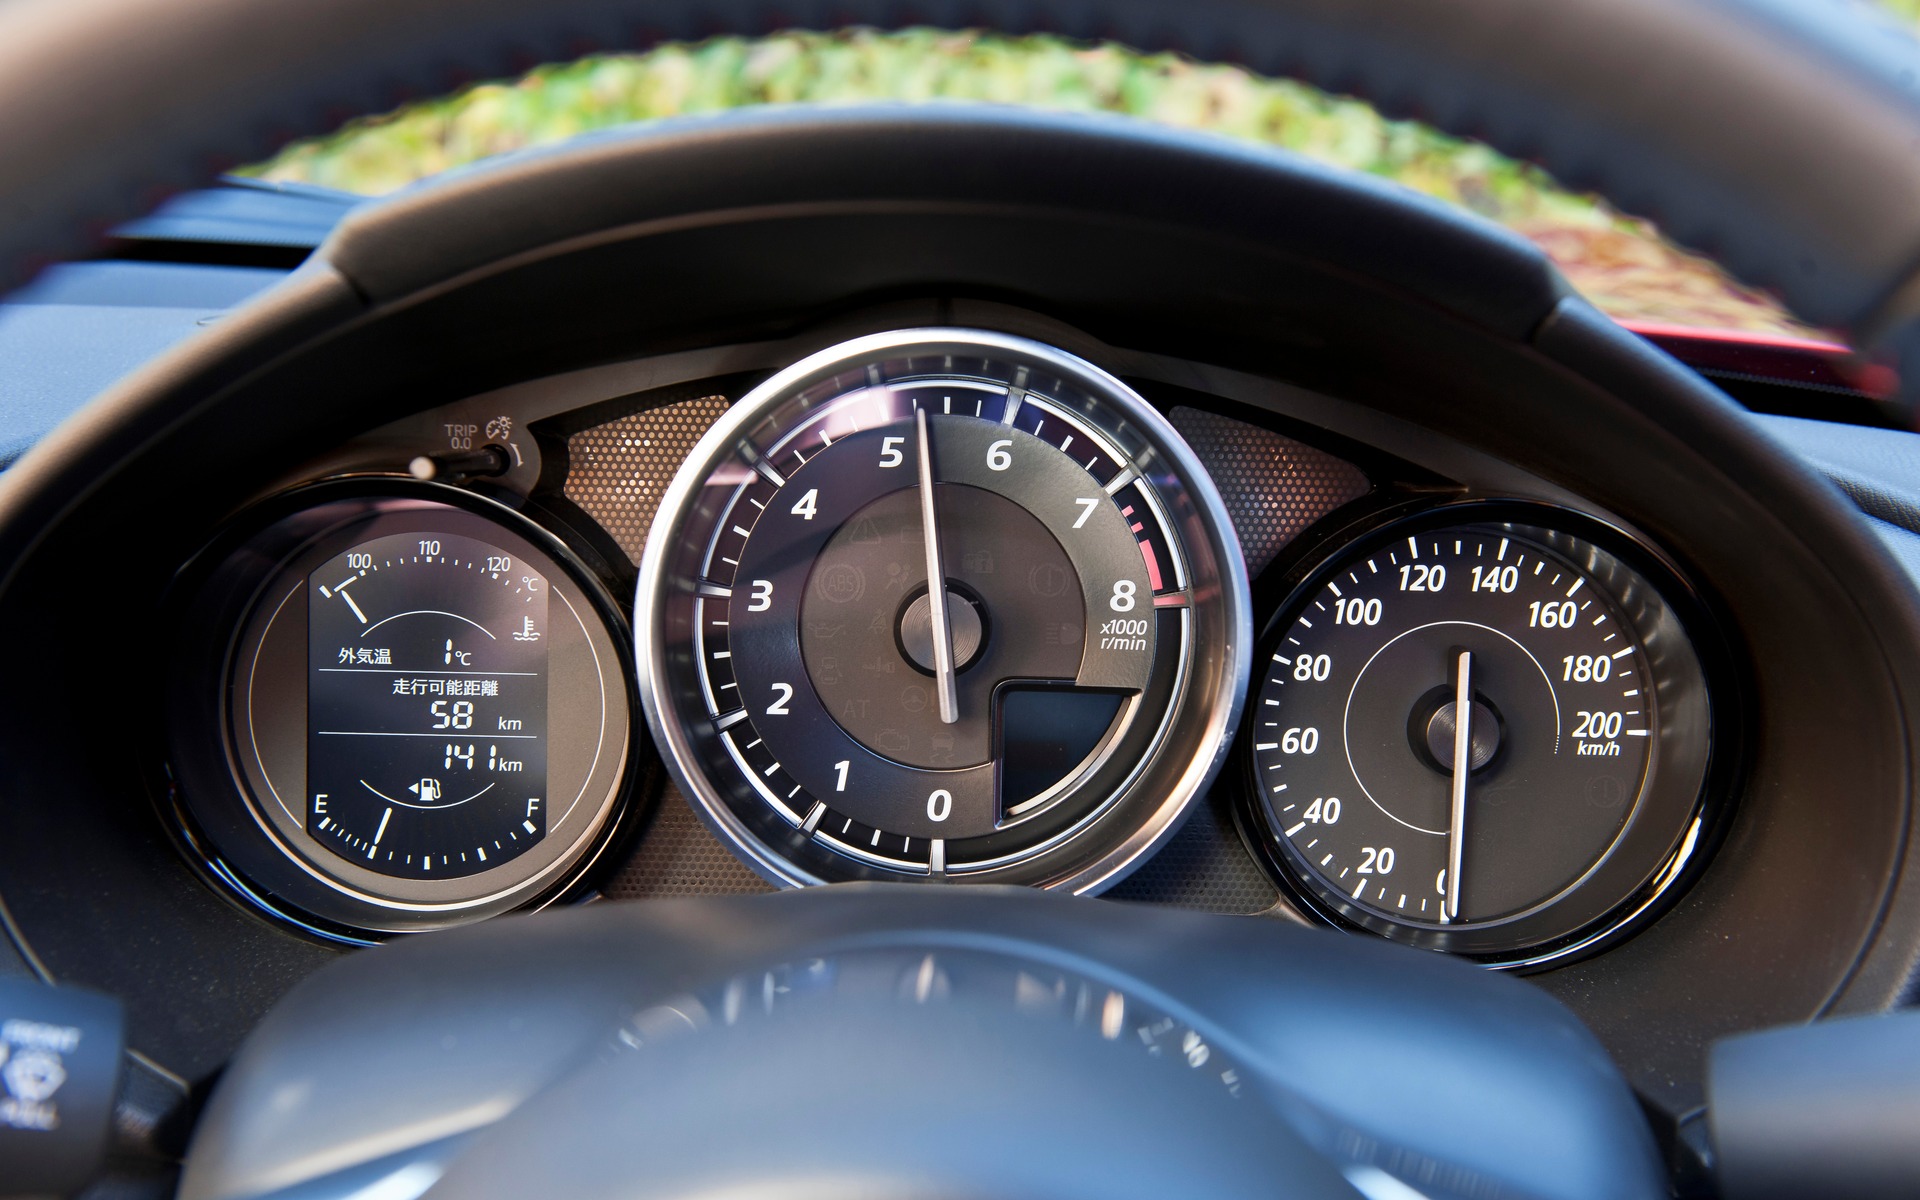 The instrumentation with the tachometer dead centre.